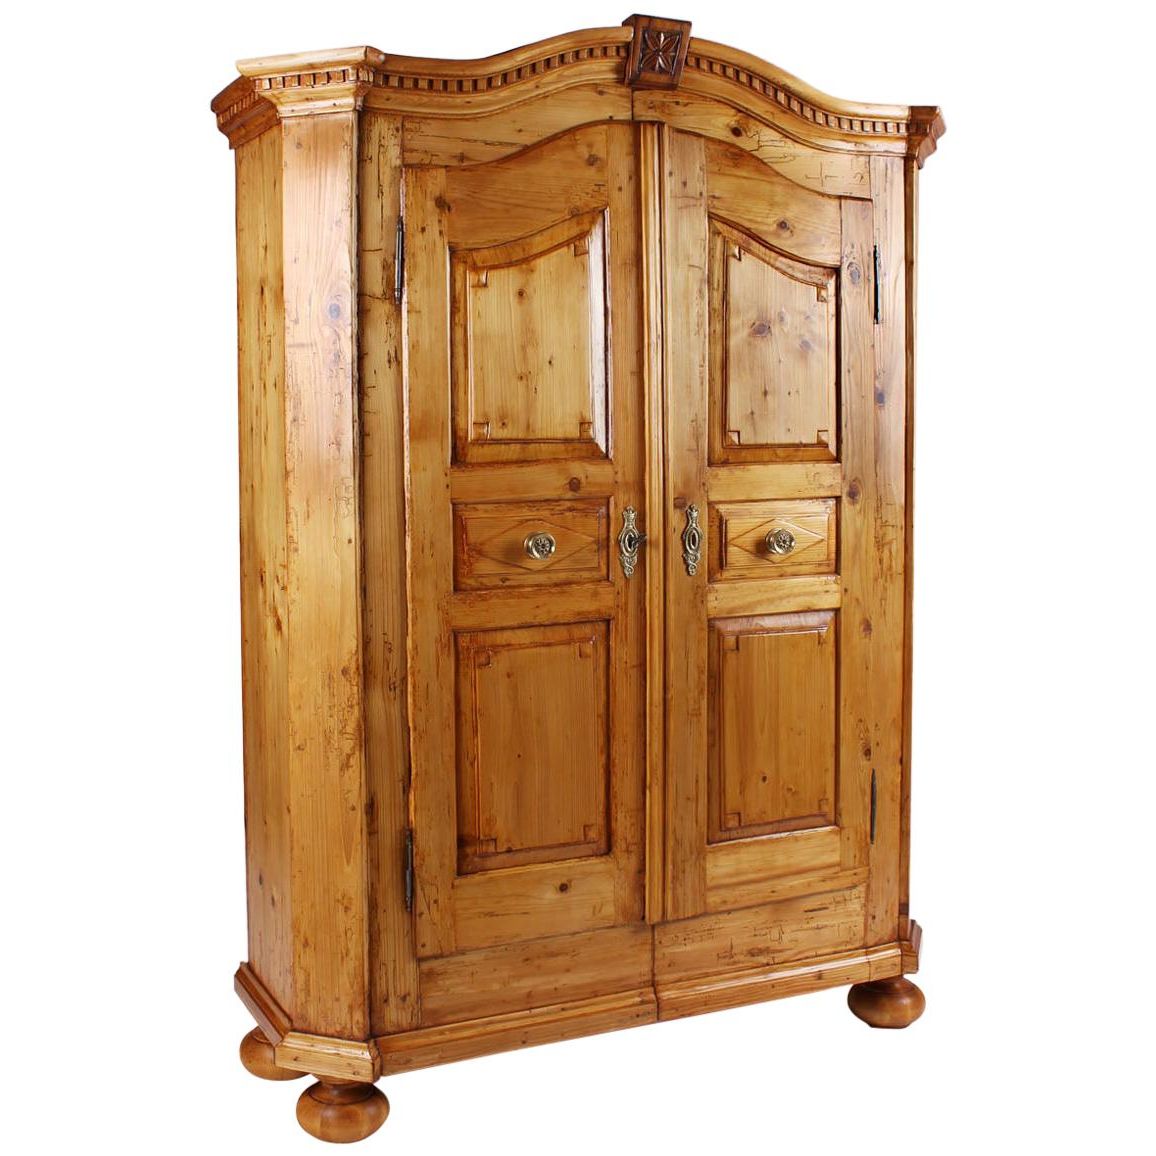 Antique Wardrobe, Light Colored Soft Wood, Southern Germany, Early 19th  Century At 1stdibs | Antique Armoire, Ornate Wardrobe, Antique Wooden  Wardrobe Intended For White Antique Wardrobes (Gallery 17 of 20)